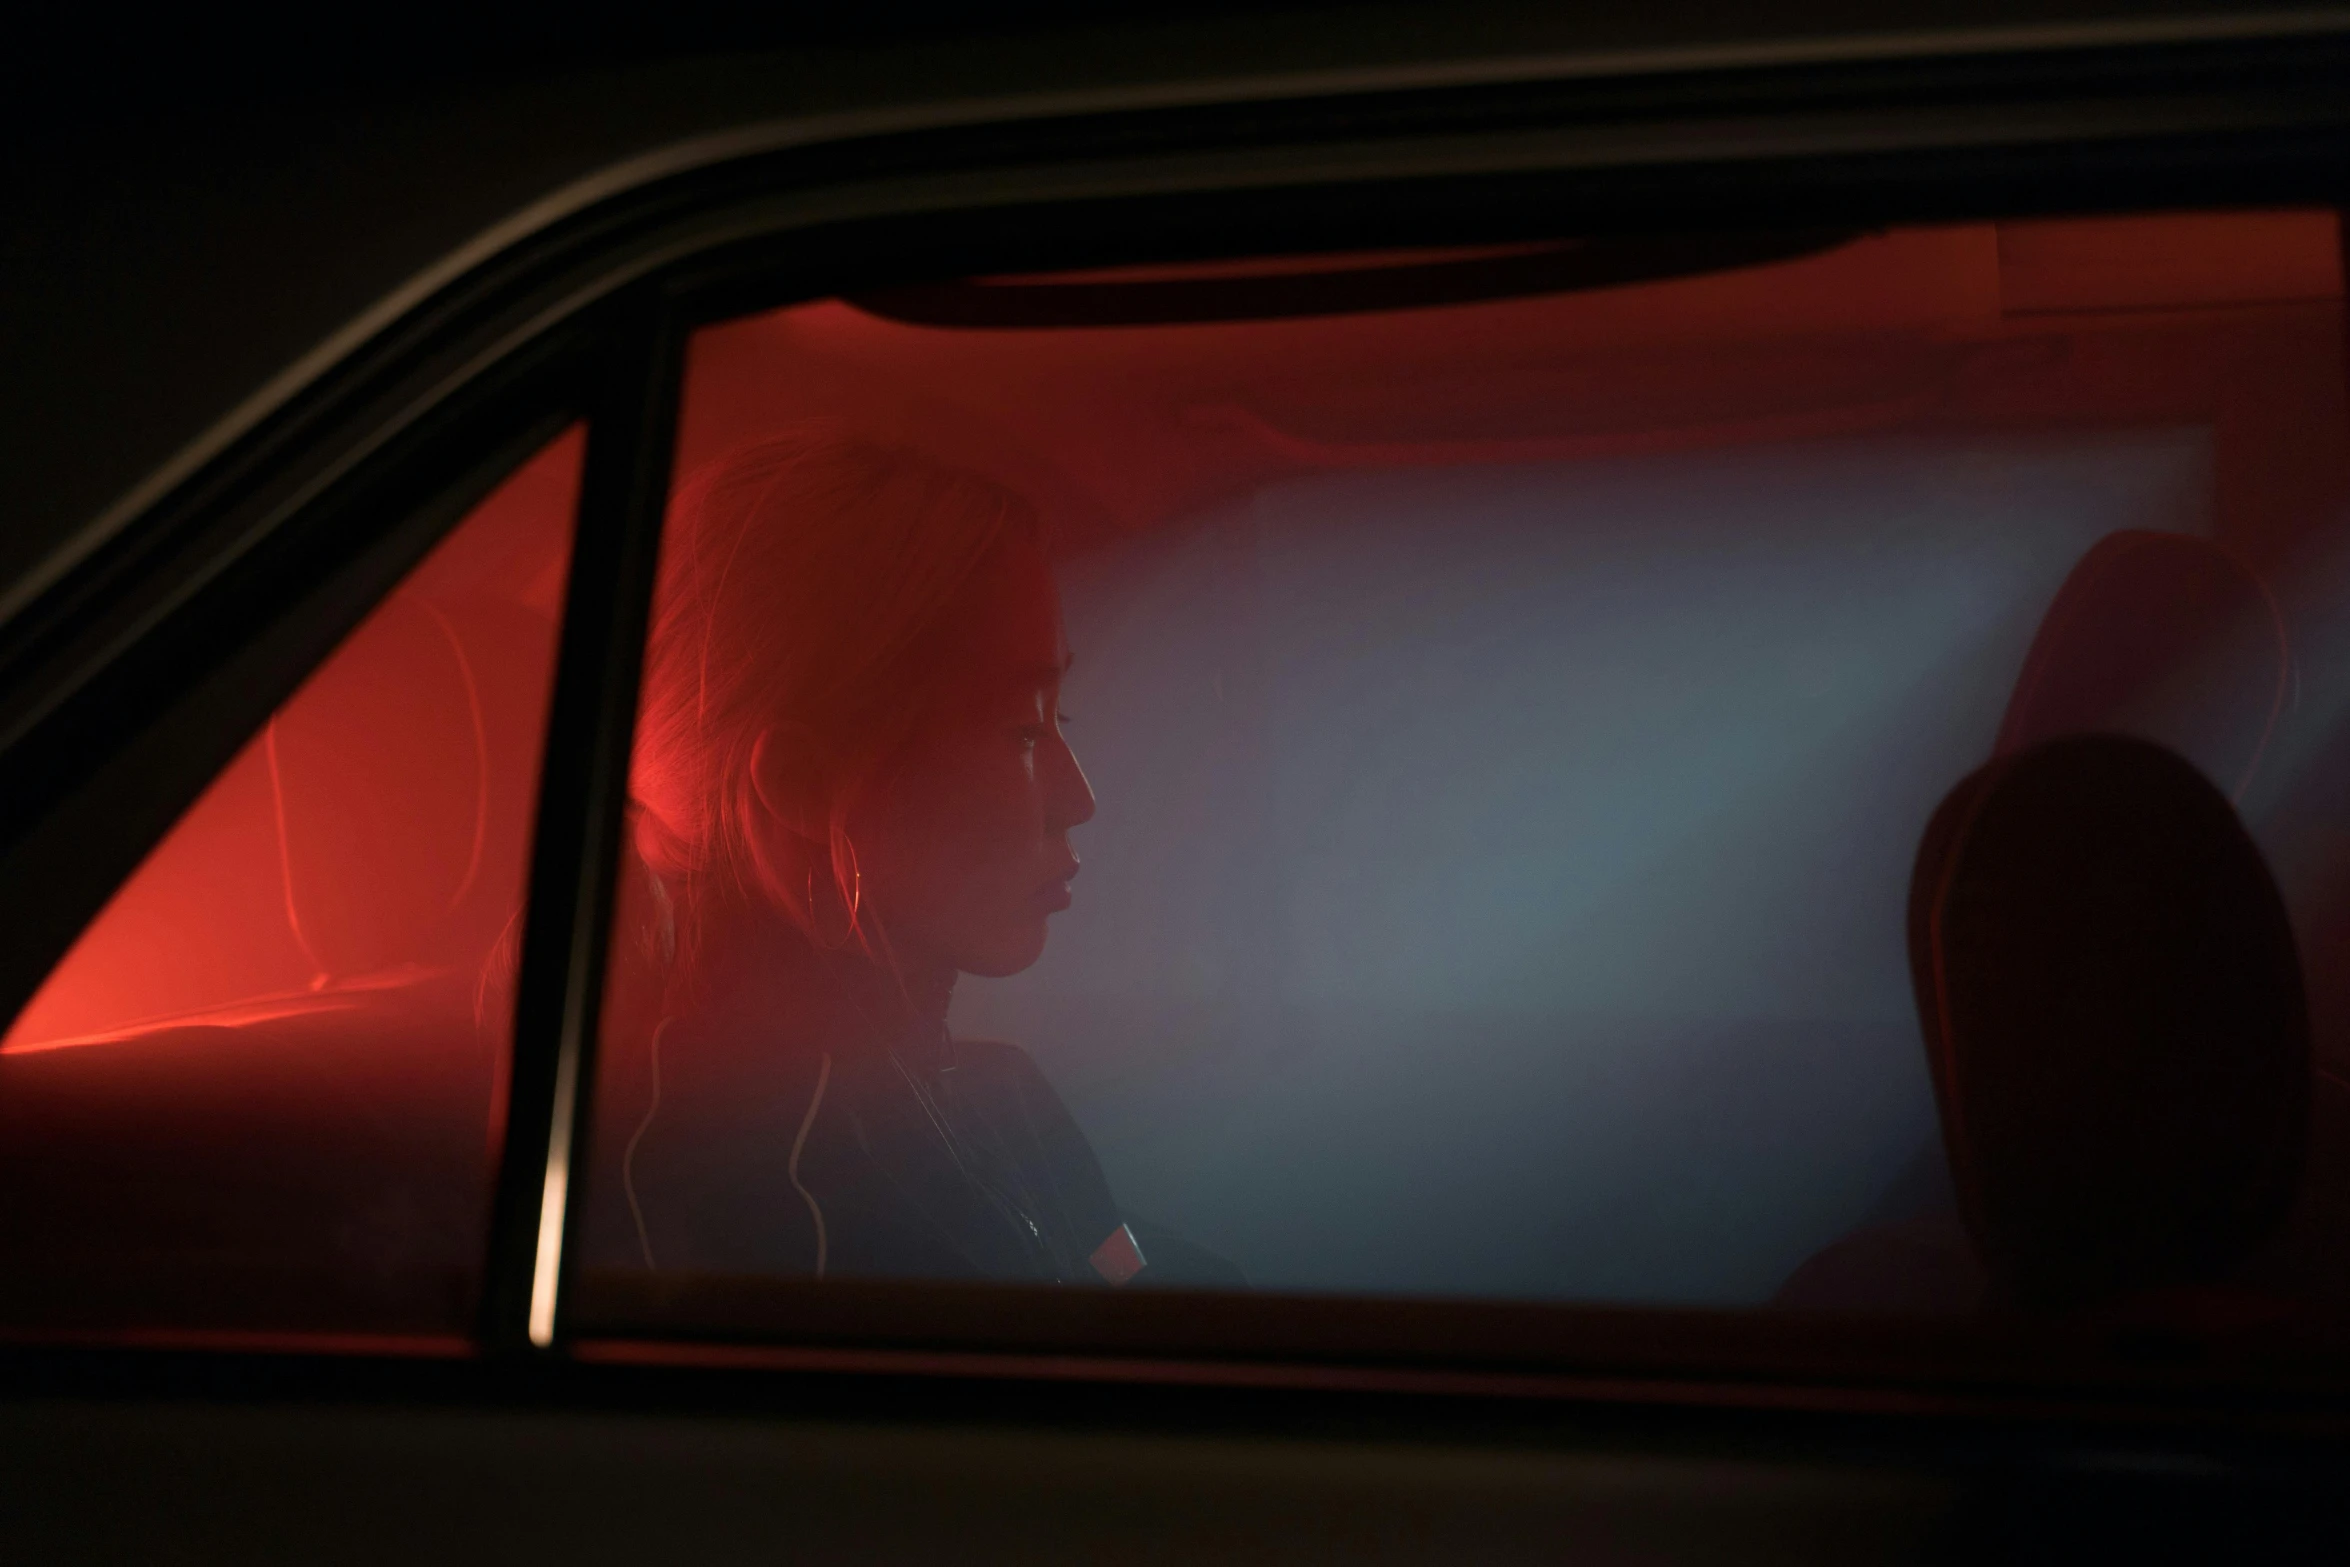 a man sitting in the passenger seat of a car, inspired by Nan Goldin, photorealism, red neon, film still of emma watson, todd hido, cinematic shot ar 9:16 -n 6 -g